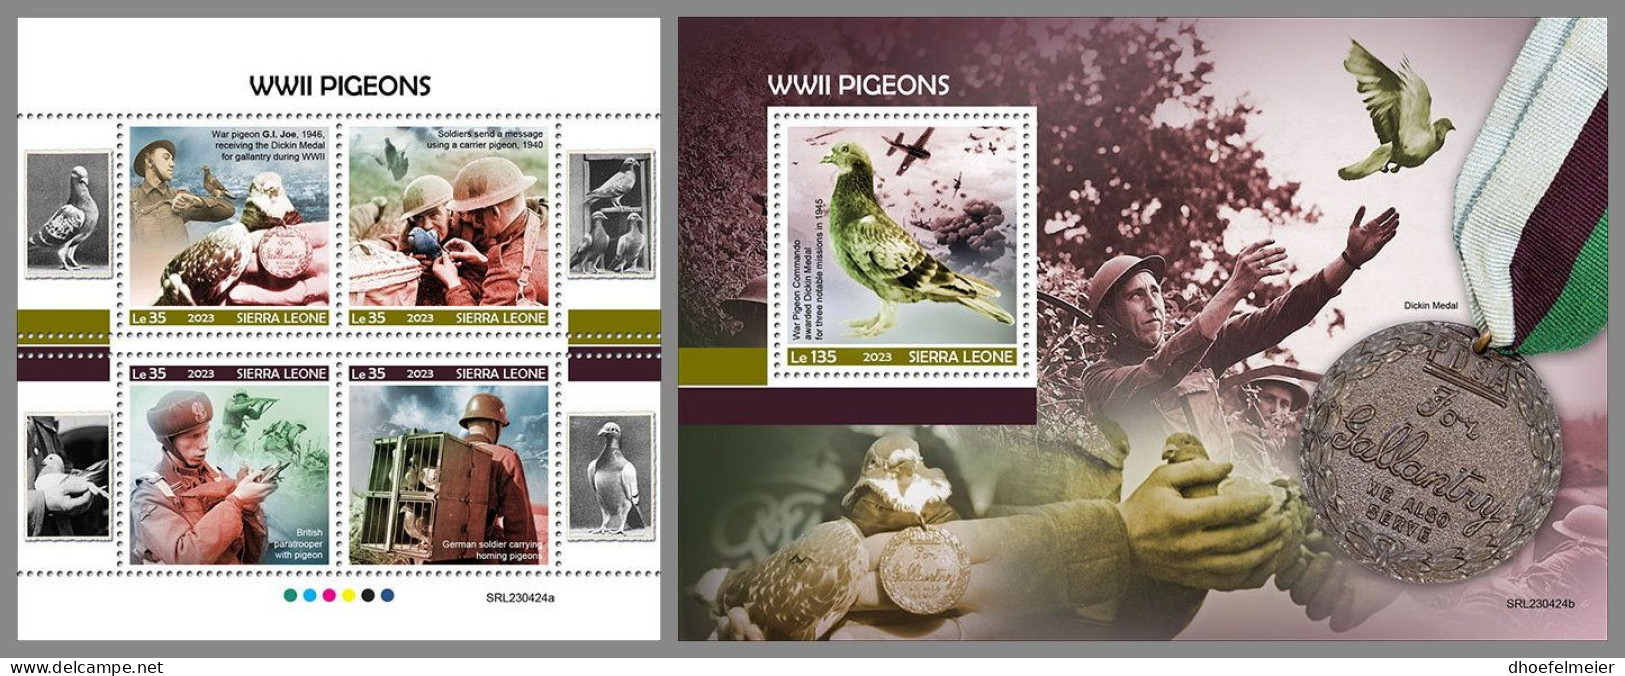 SIERRA LEONE 2023 MNH WWII Pigeons Tauben M/S+S/S – OFFICIAL ISSUE – DHQ2407 - Columbiformes